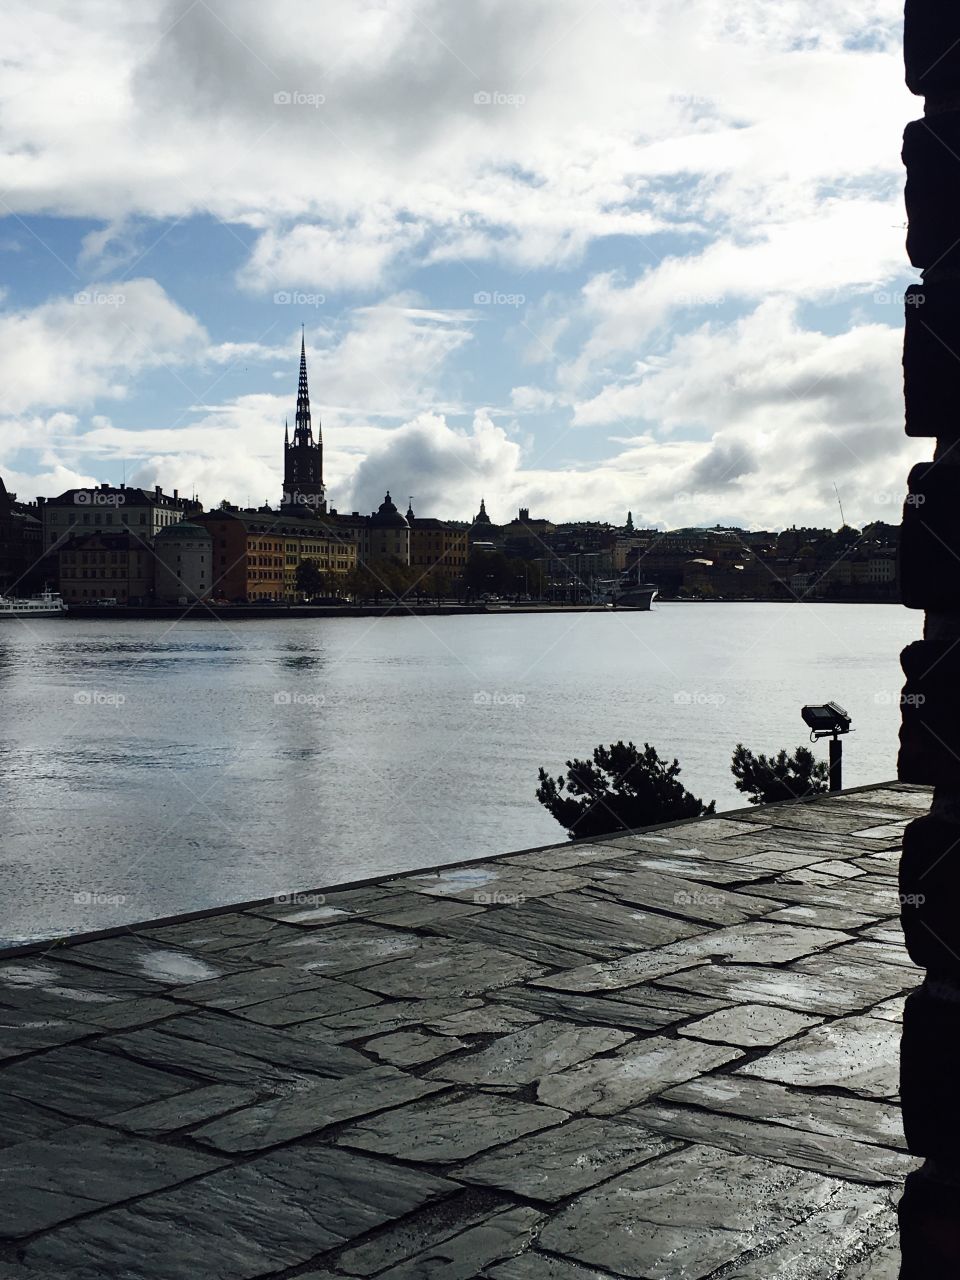 Overlooking a river in Stockholm Sweden from City Hall